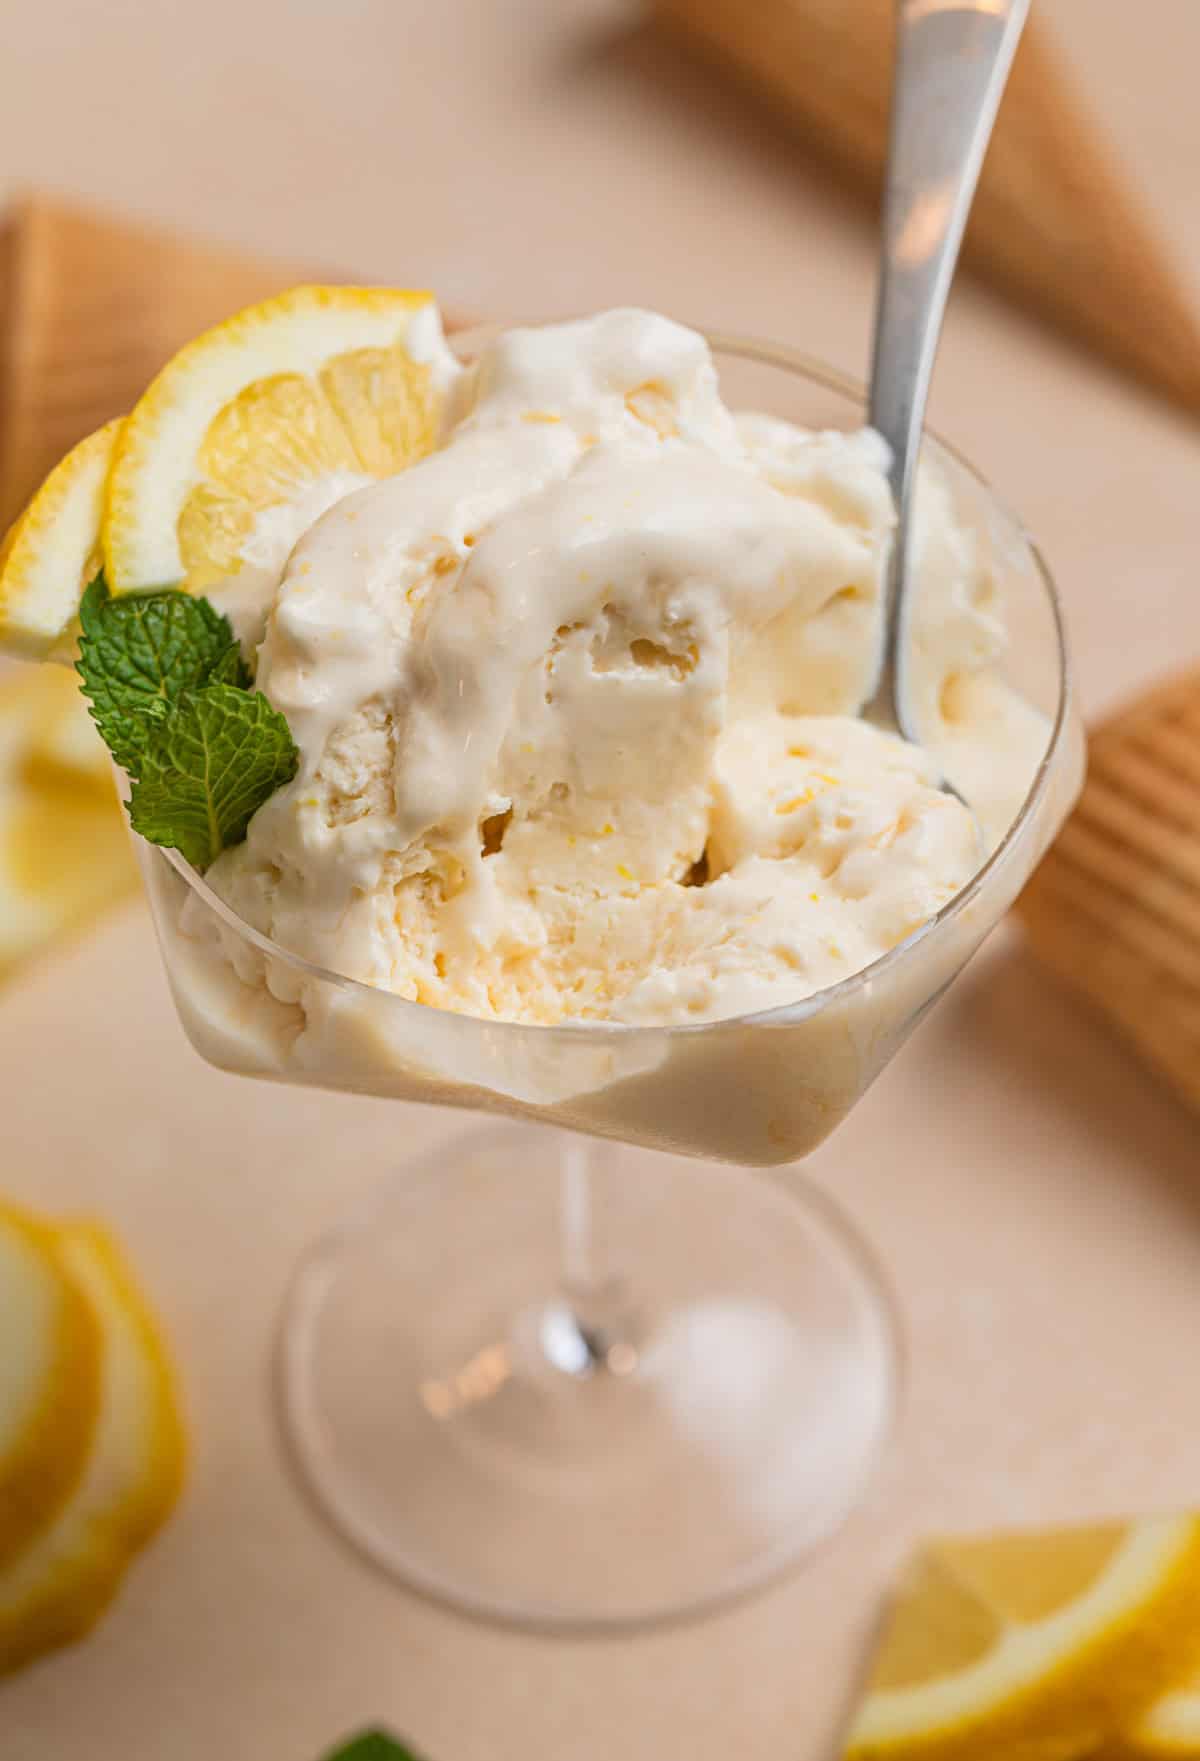 Dish with half of a serving of lemon ice cream and spoon placed in the dish.